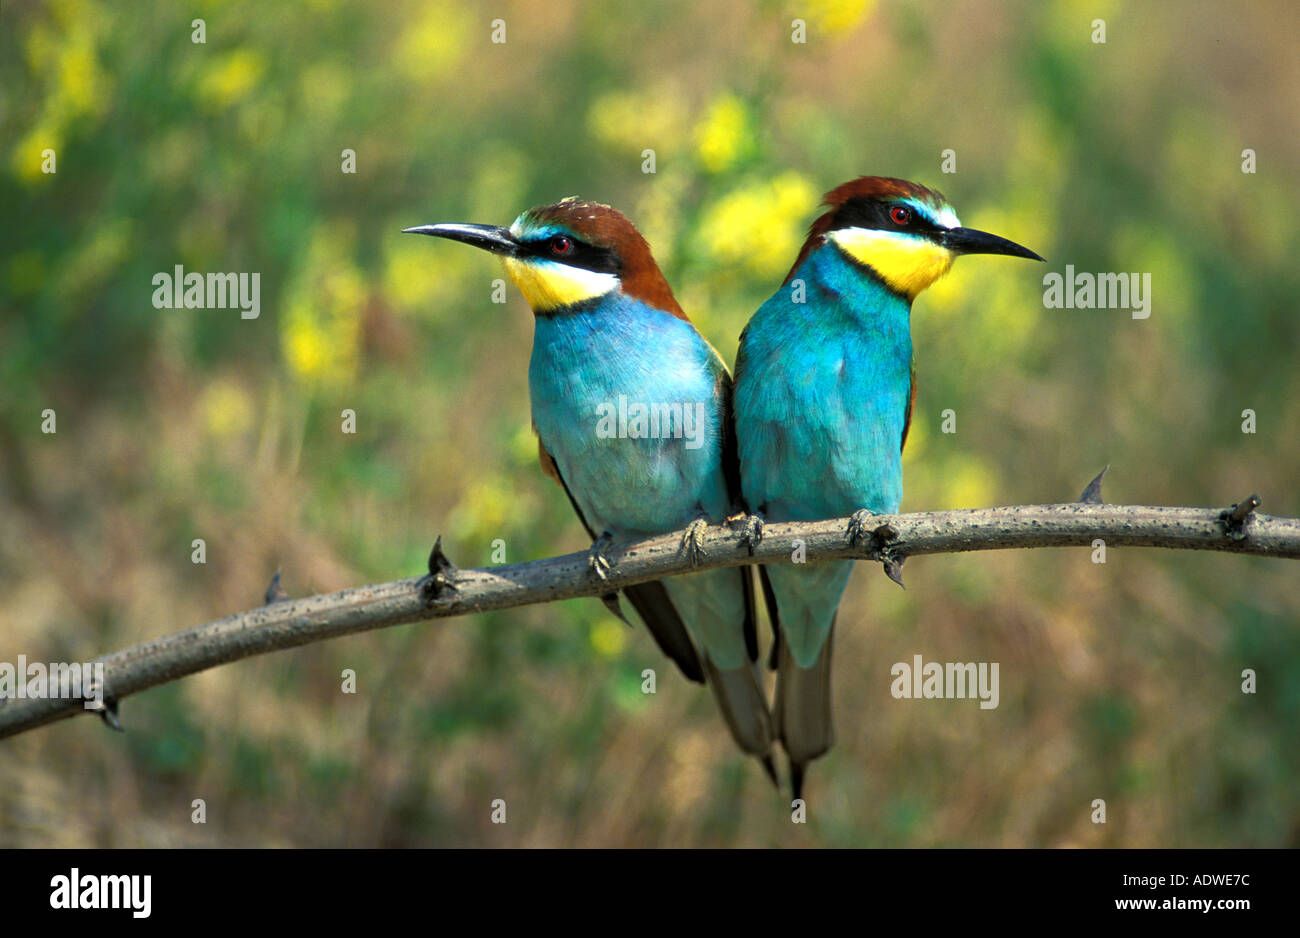 Male and female European bee eaters, close-up Stock Photo